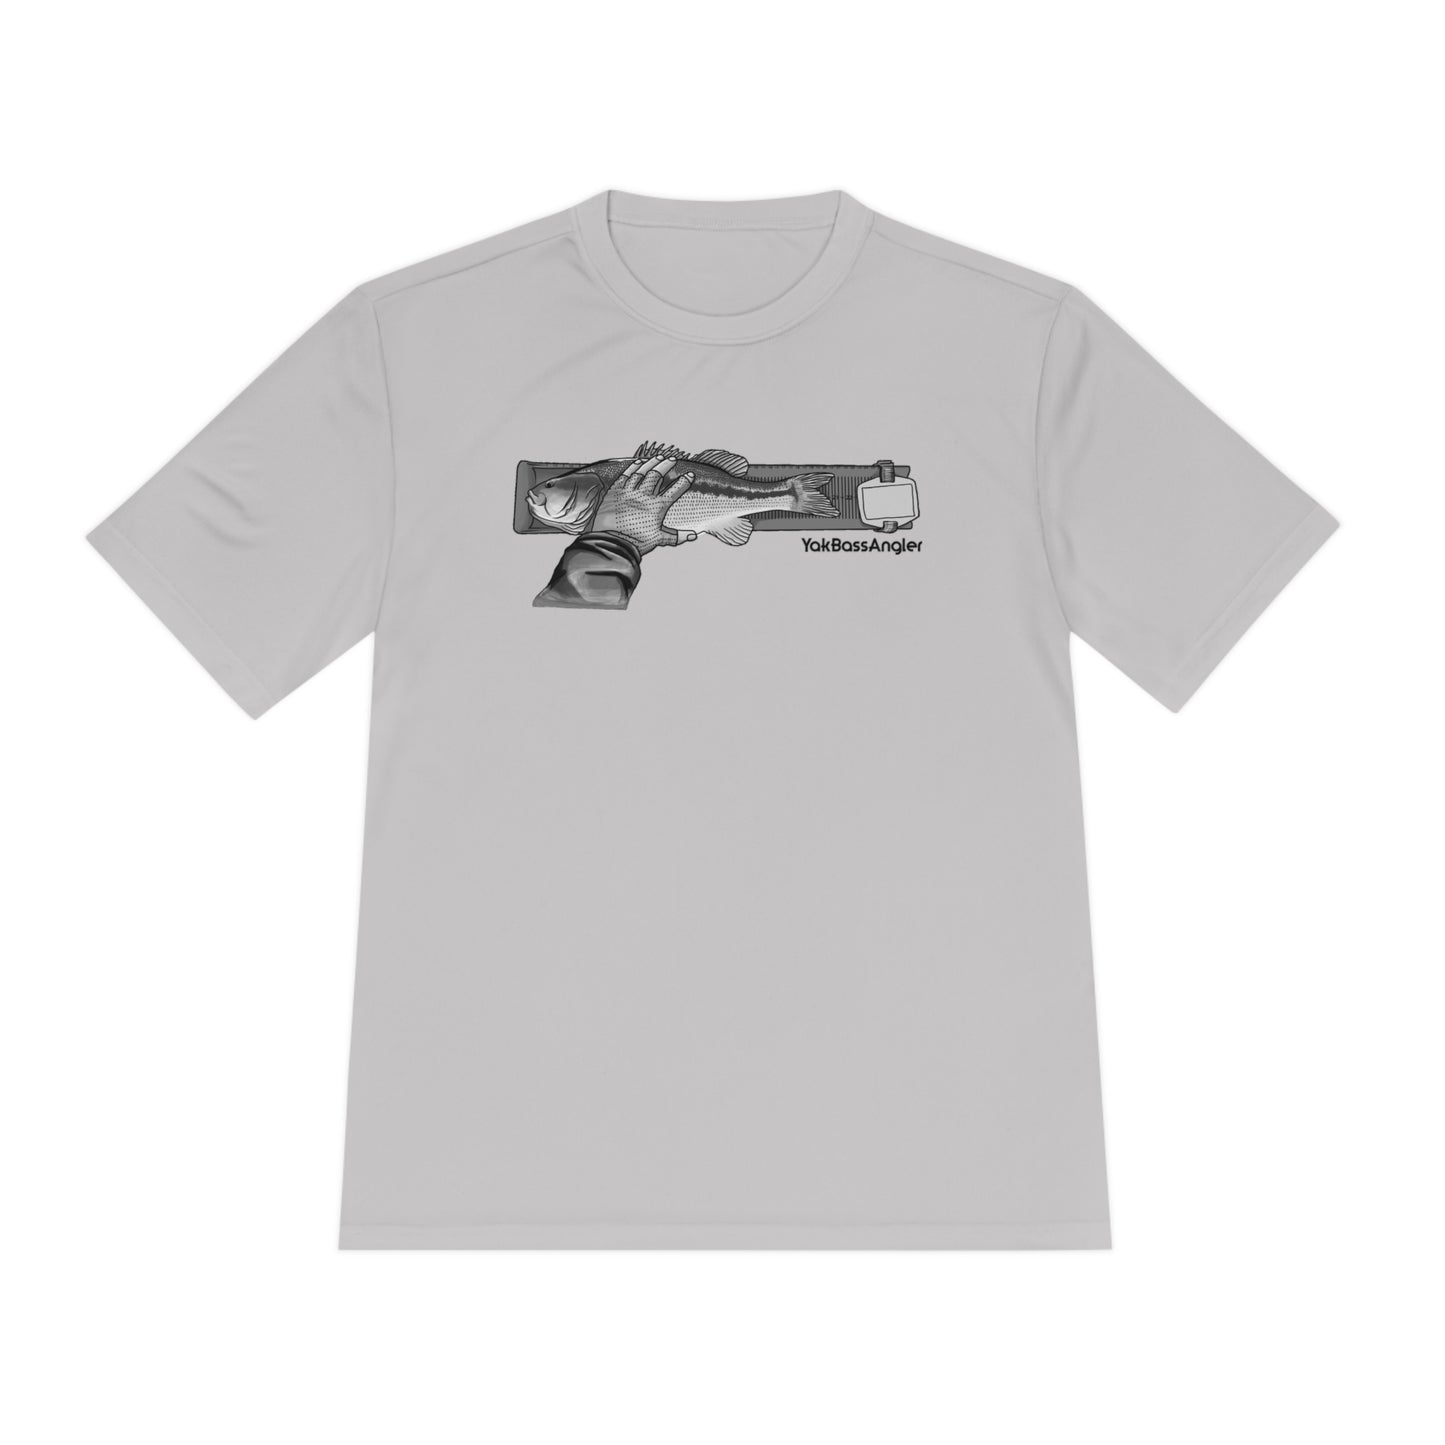 Performance T-Shirt - The Cull